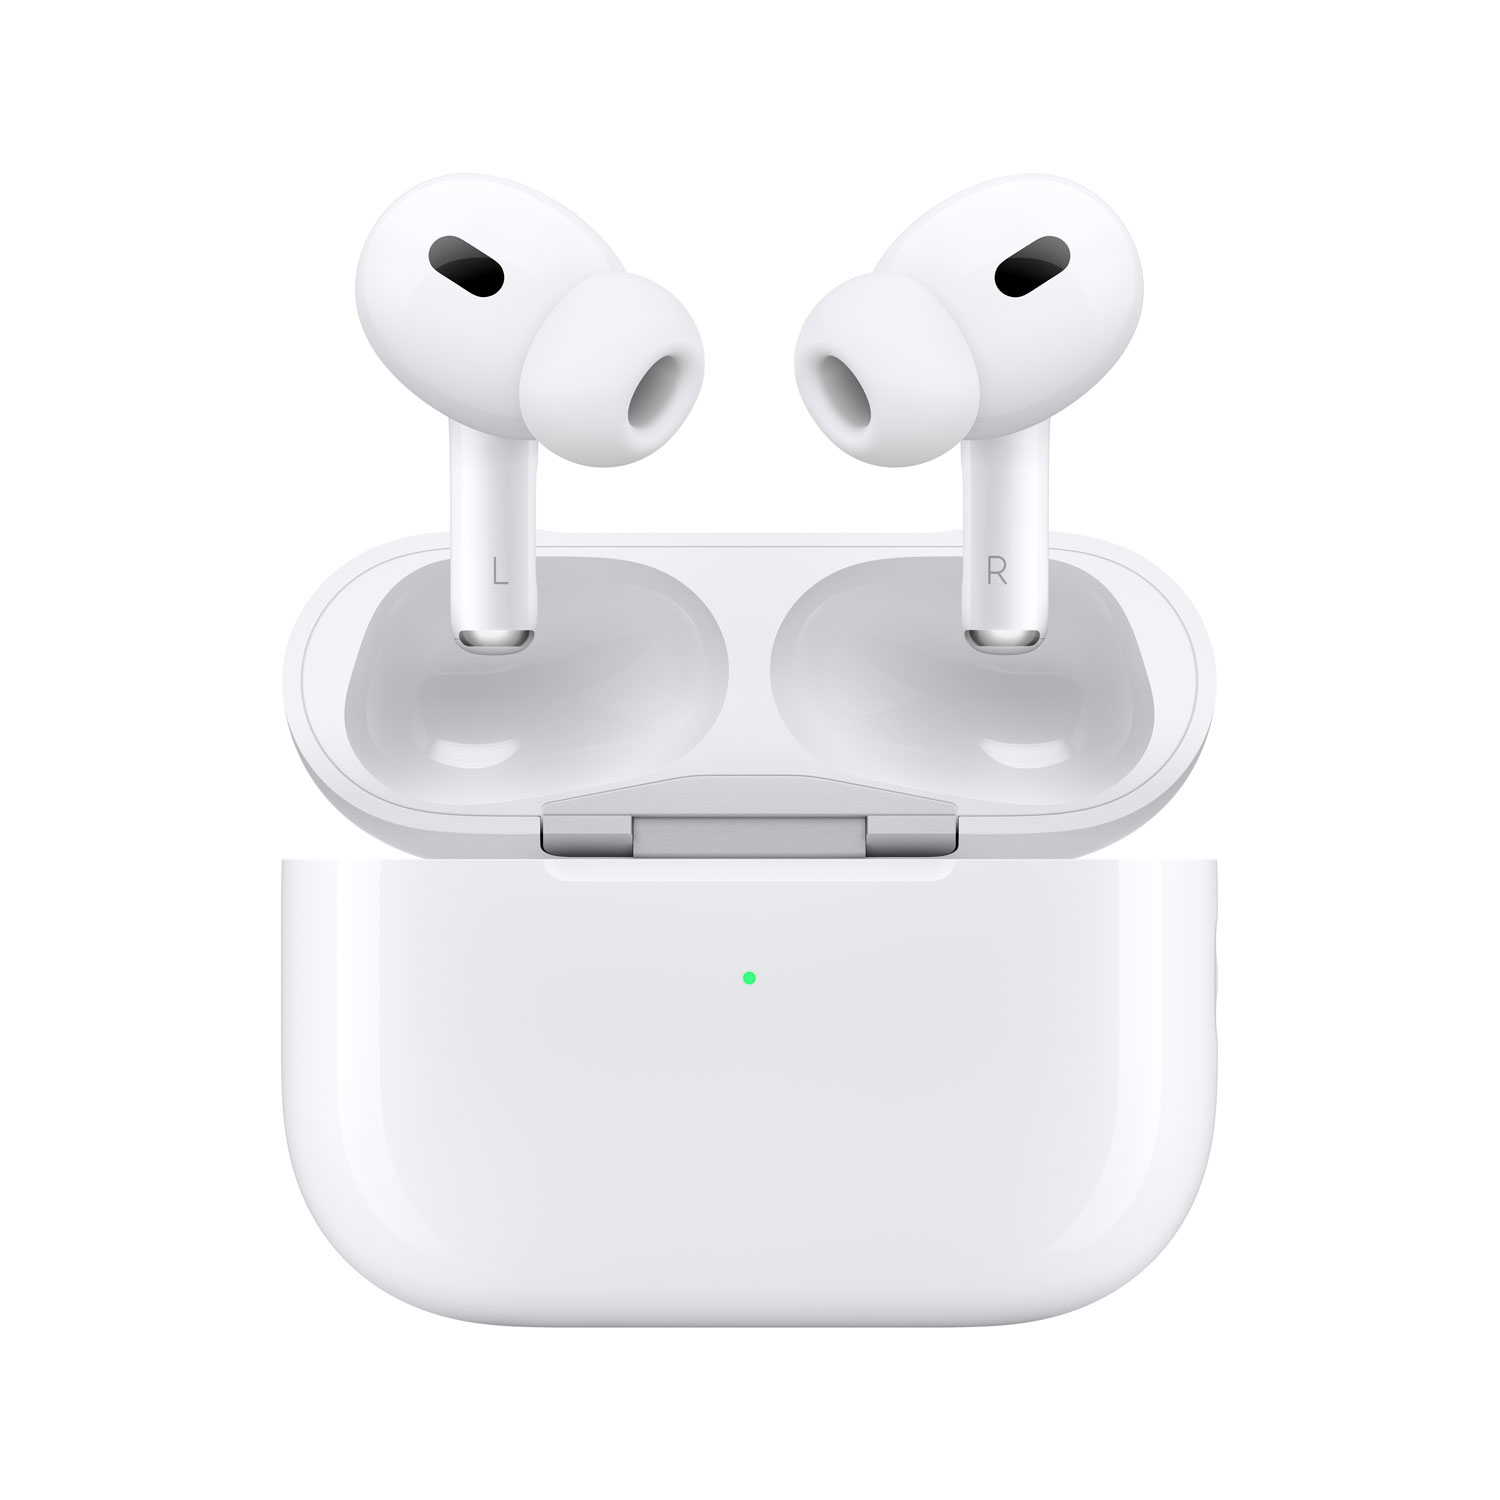 Apple AirPods Pro (2nd generation) Noise Cancelling True Wireless Earbuds with USB-C MagSafe Charging Case